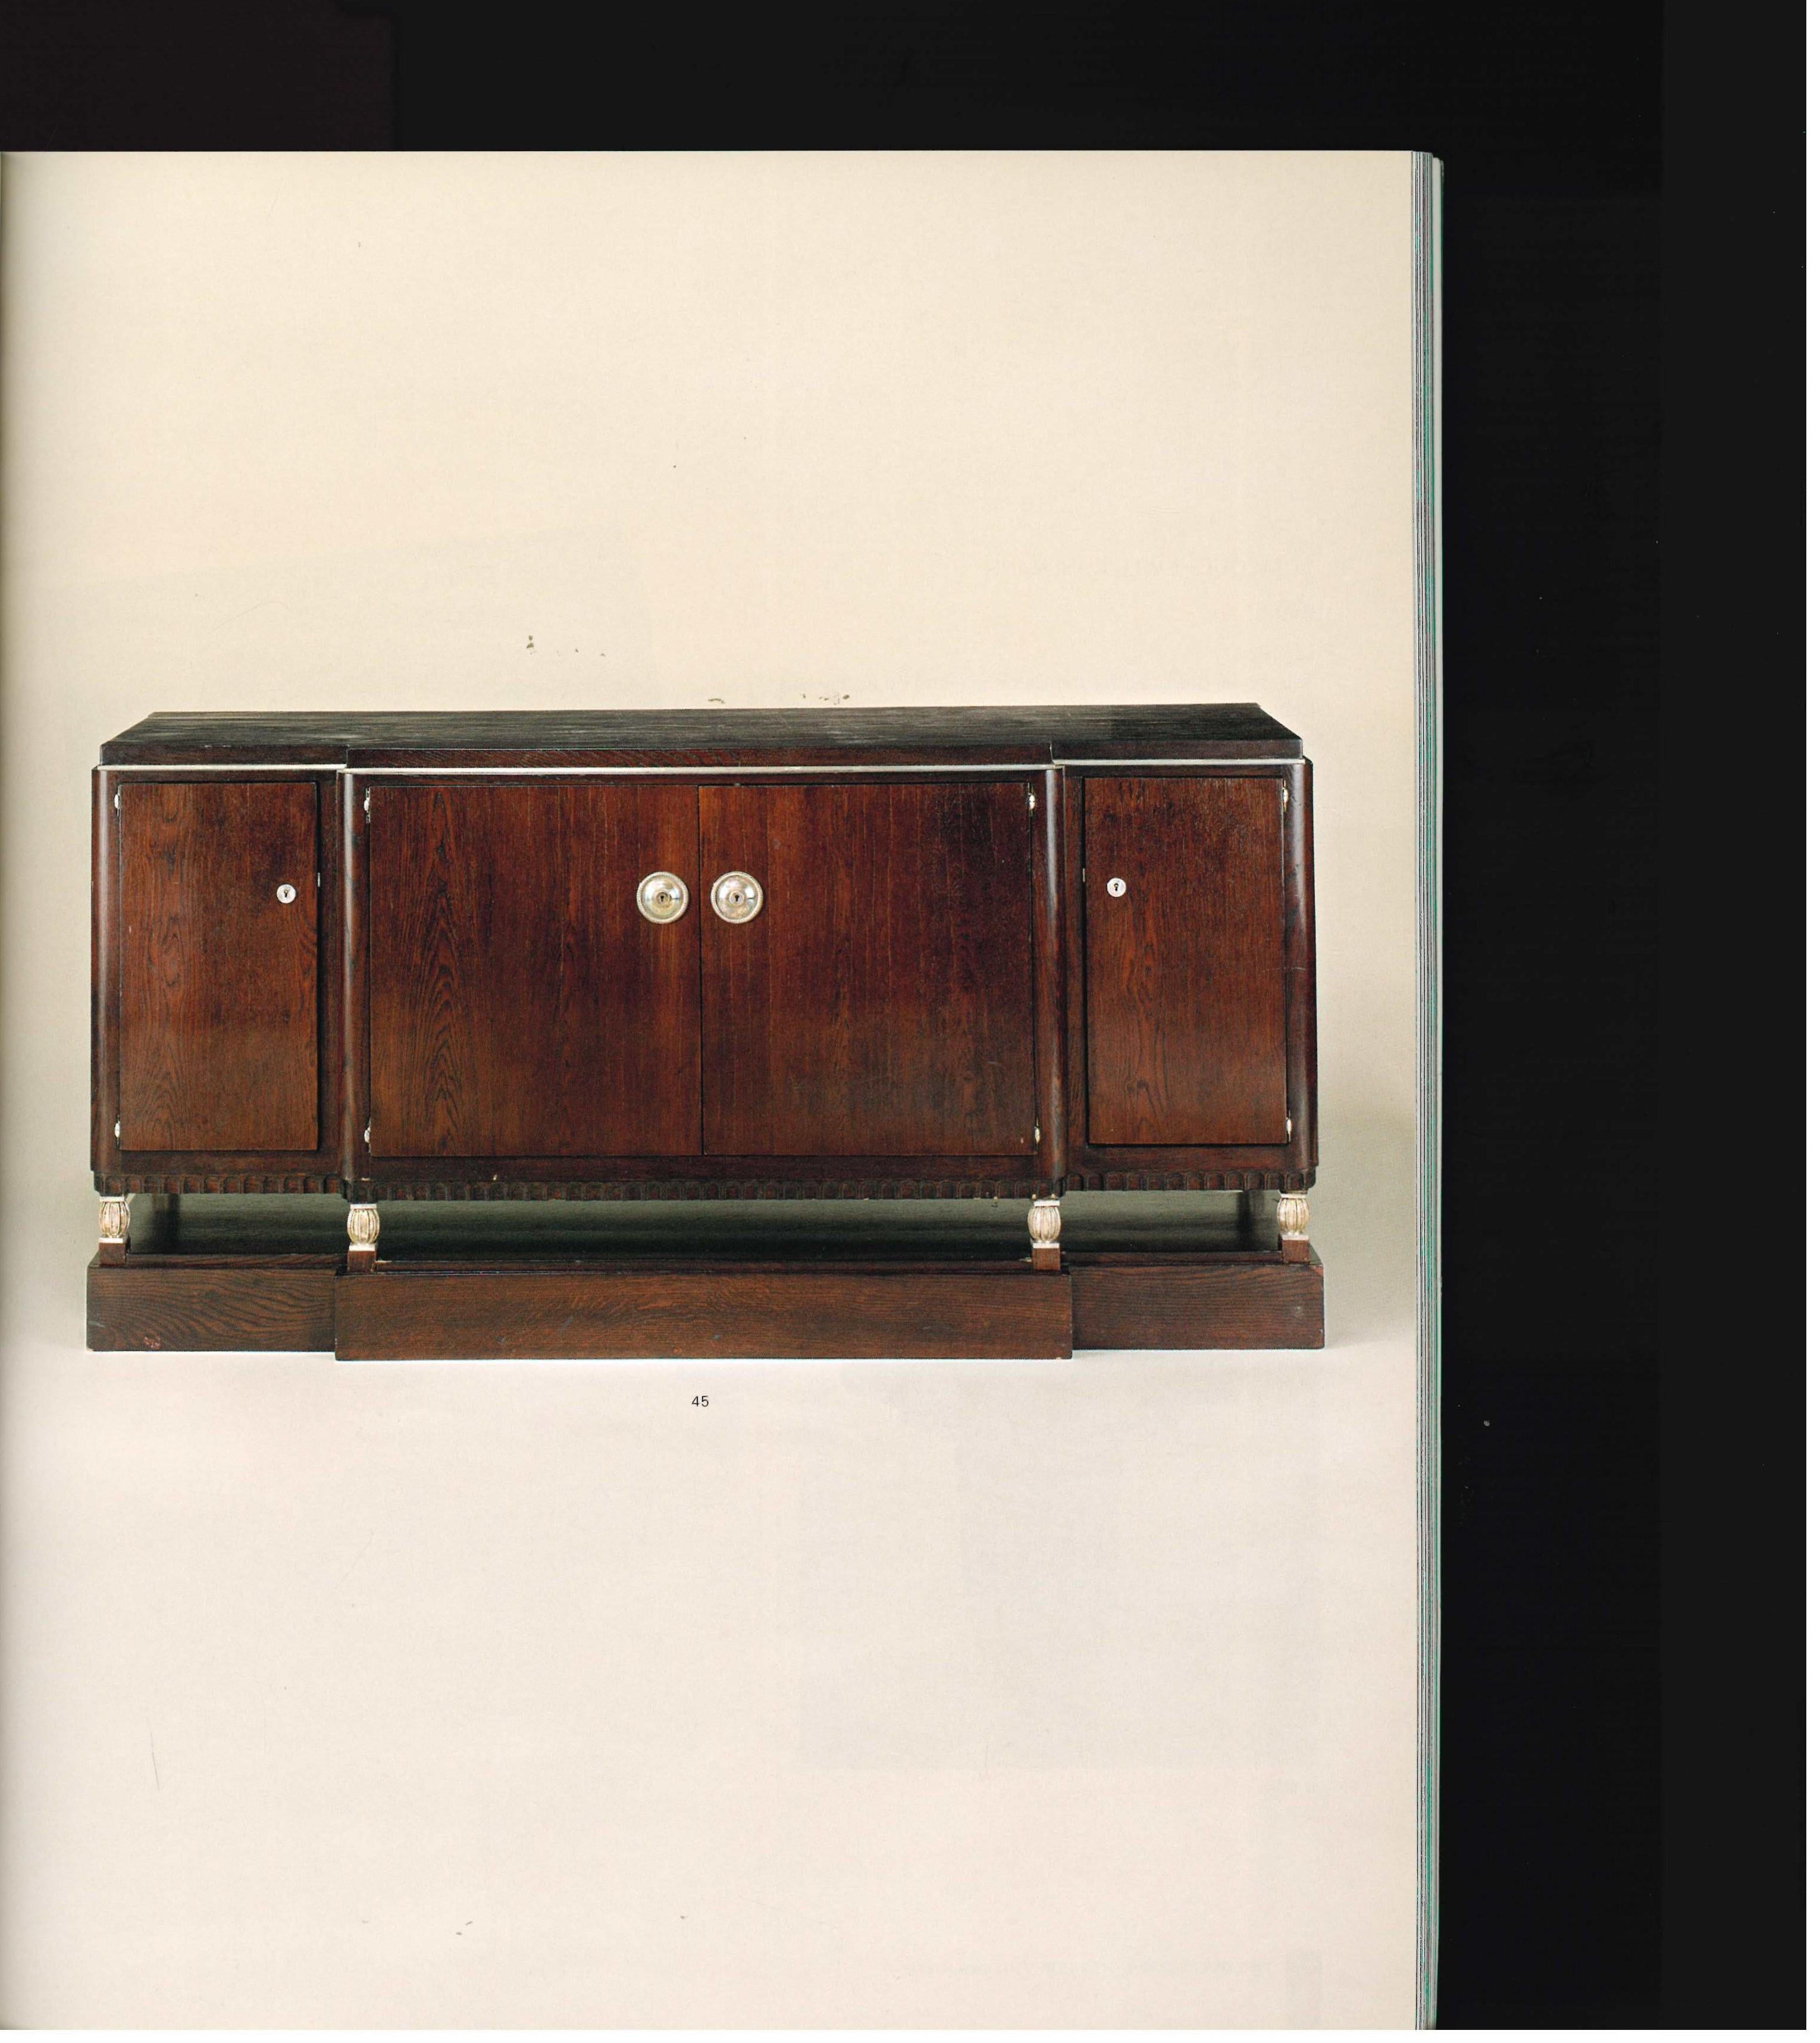 20th Century Collection of Barry Friedman Ltd, 2004 Sotheby's Sale Catalogue (Book) For Sale